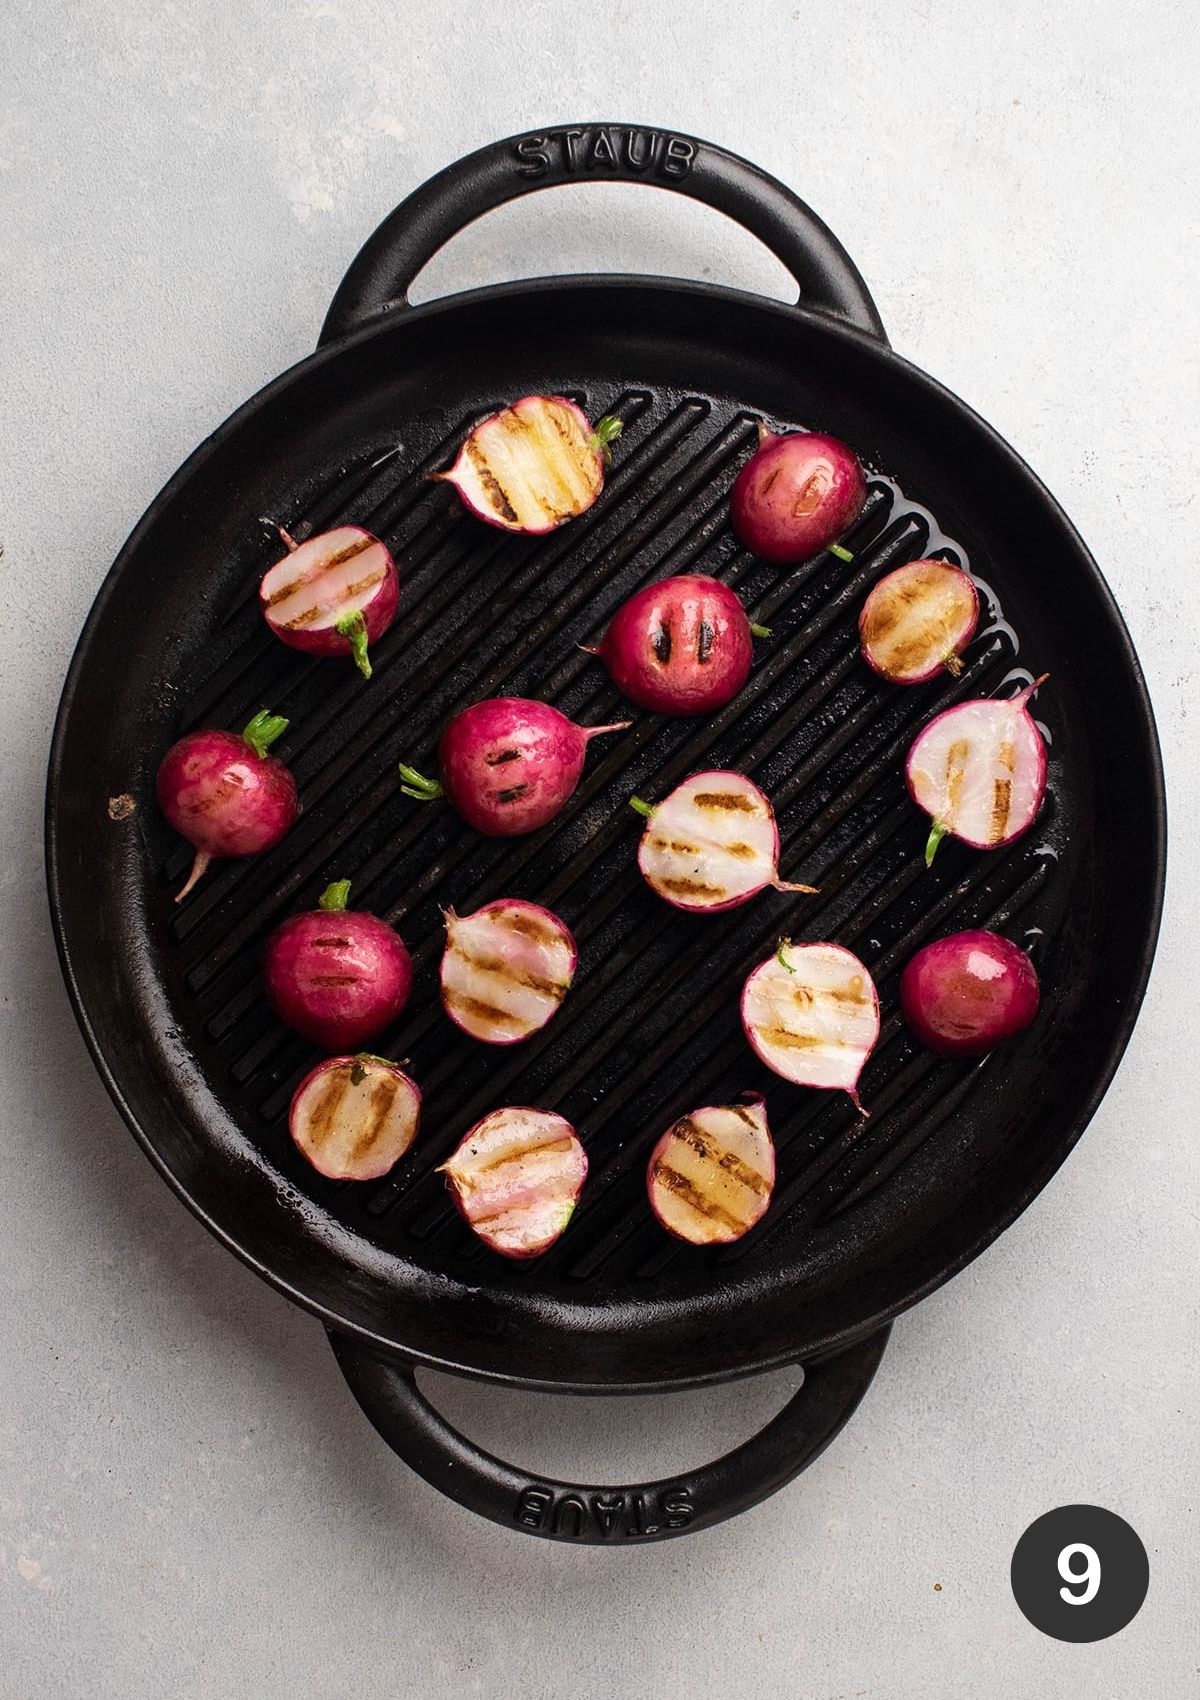 Cooking radishes on a black grill pan.